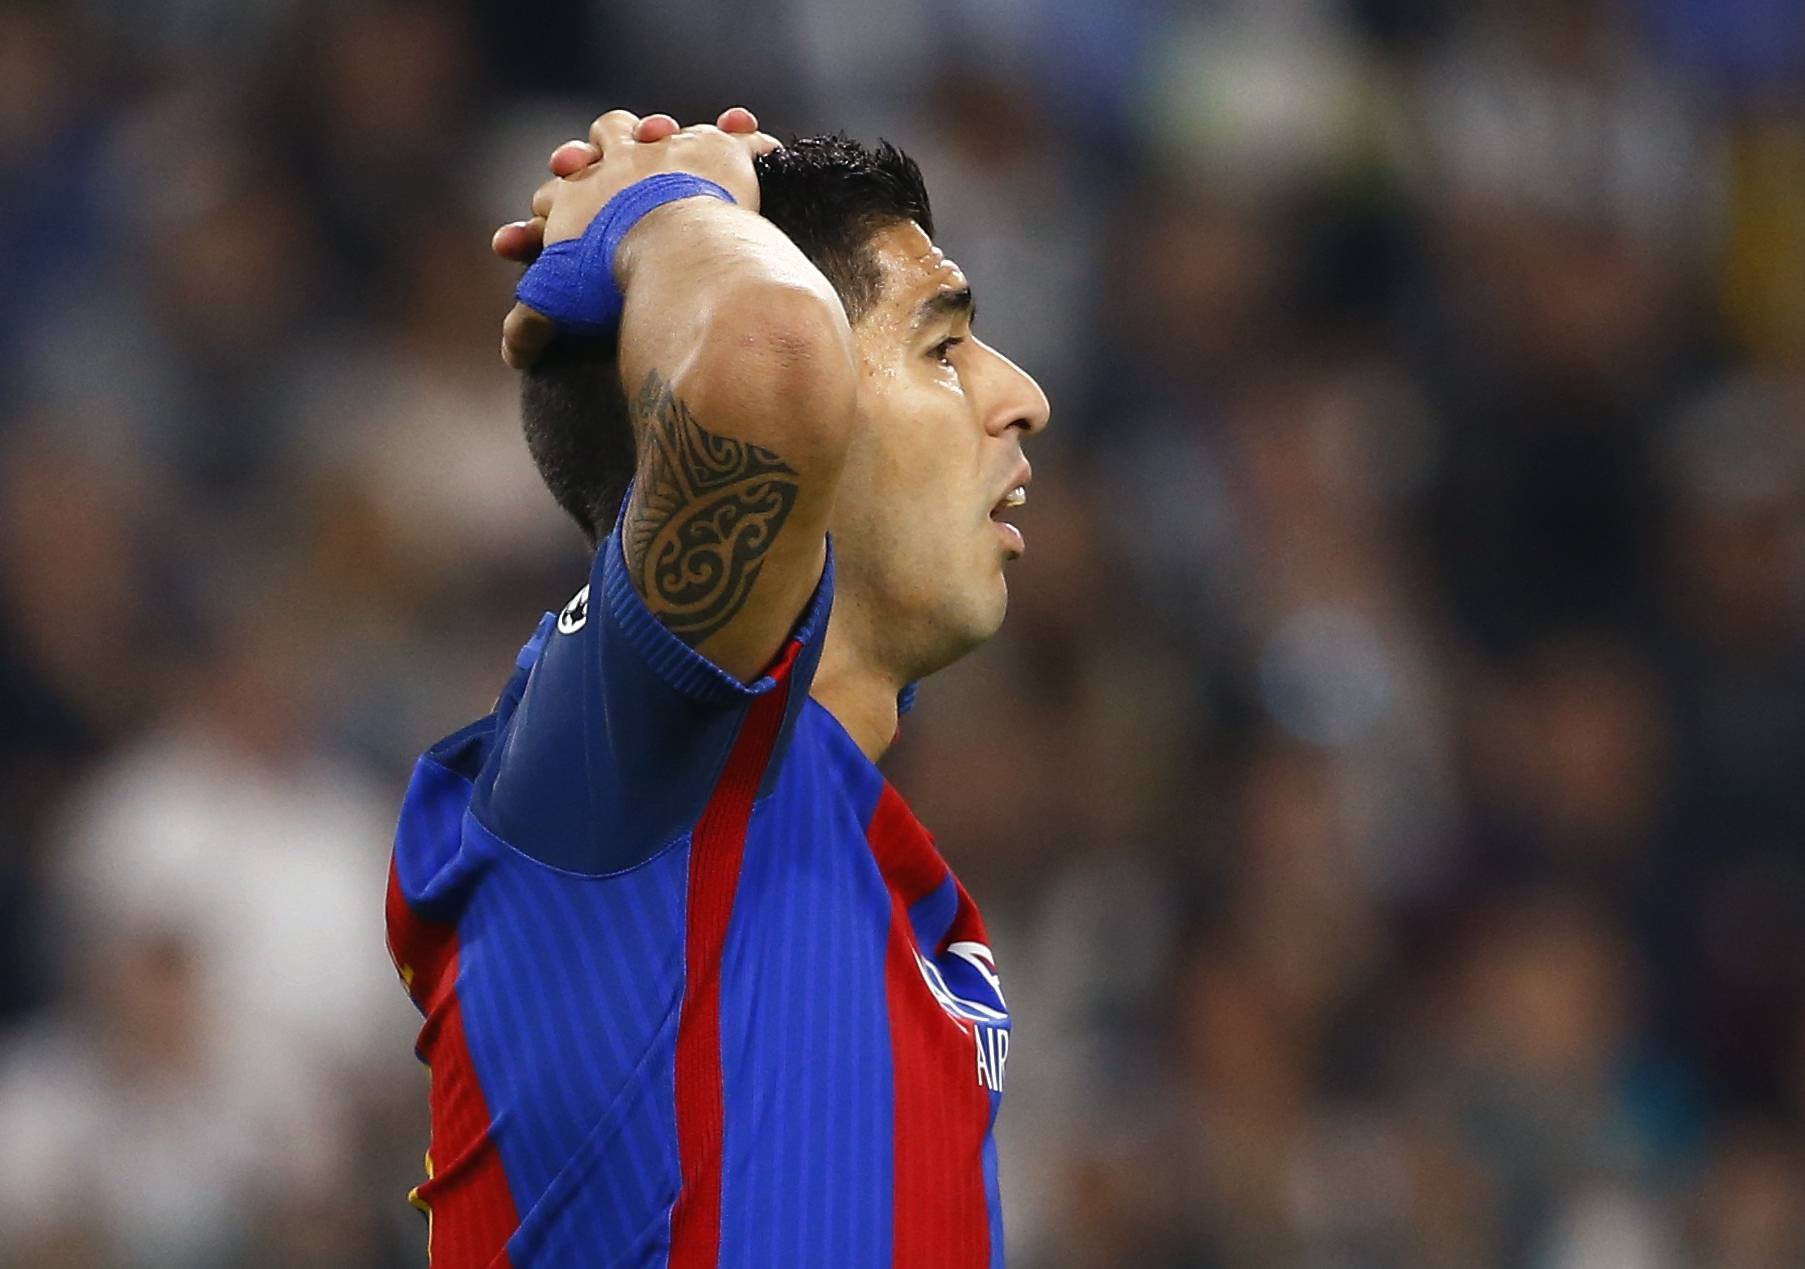 Barcelona's Luis Suarez looks dejected after Juventus' Paulo Dybala scored their second goal